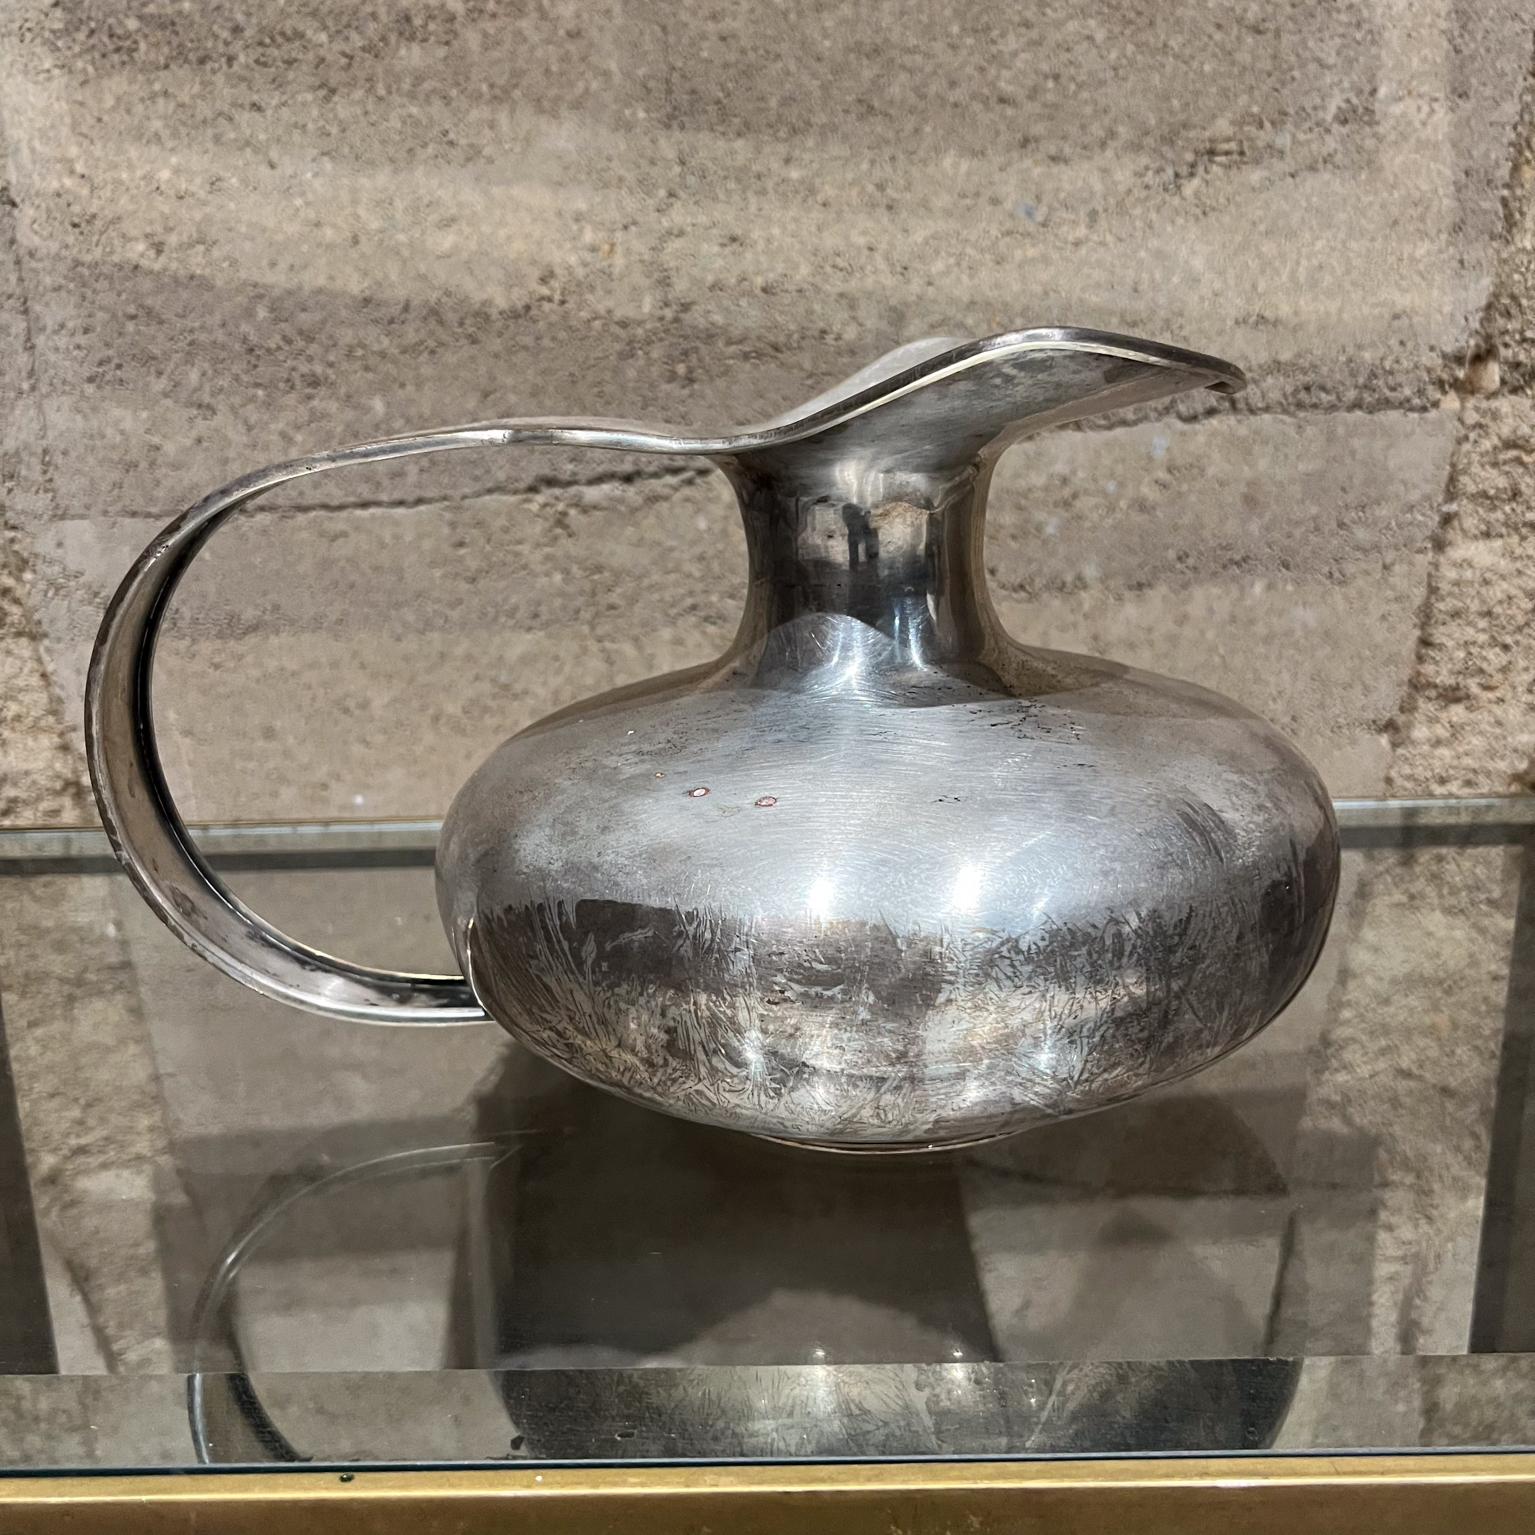 1950s Rubens International Pitcher handcrafted from Mexico 
Silver Plated
maker stamped
7.75 h x 9.5 w x 12.5 d
Original vintage presentation unrestored
Refer to images provided.